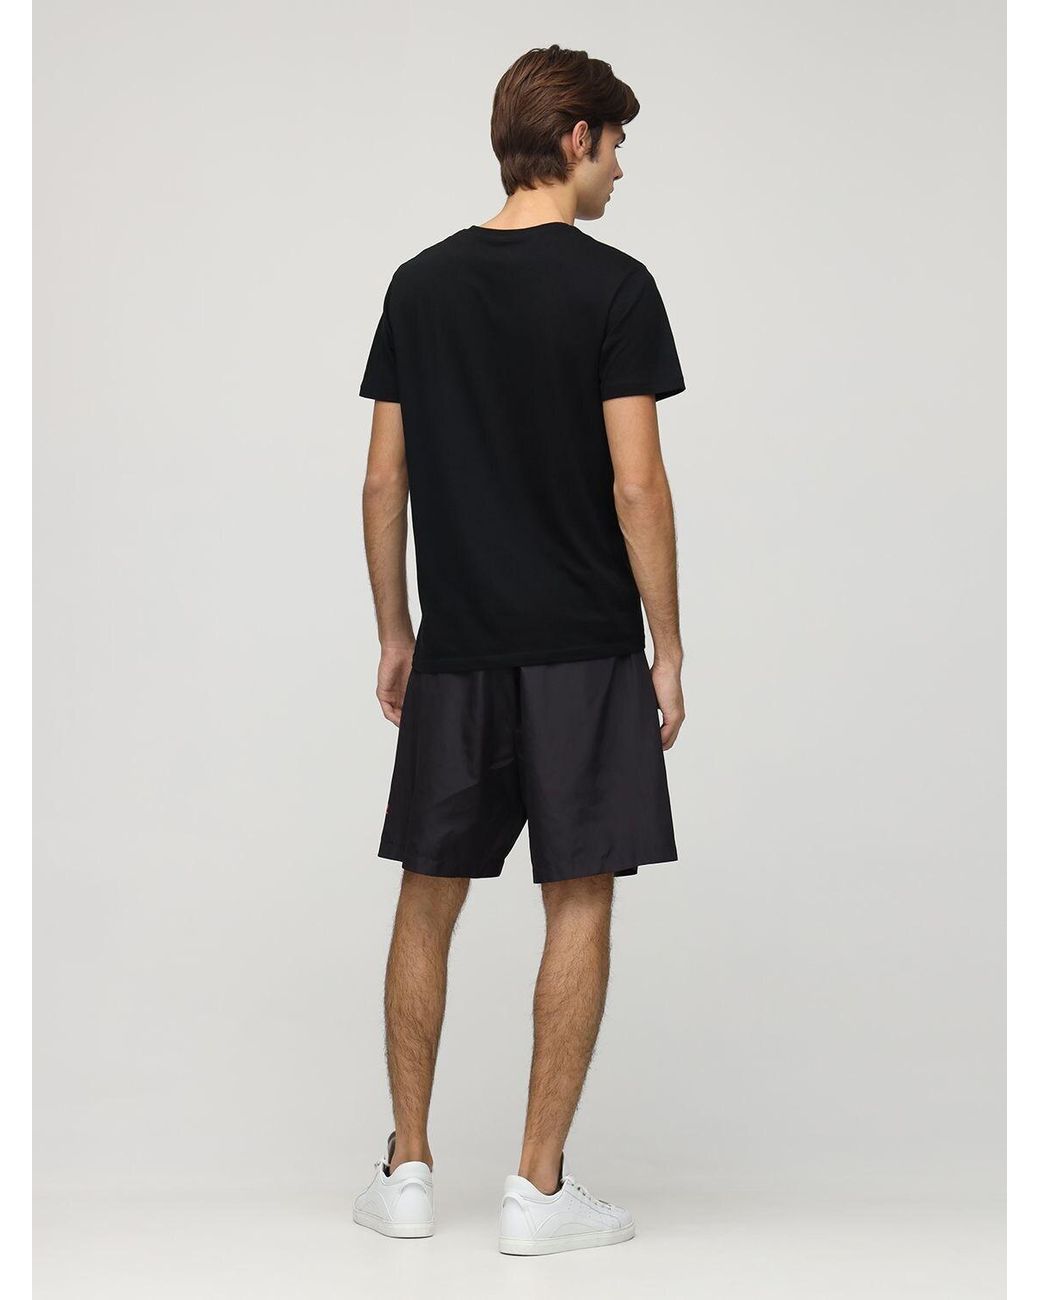 DSquared² Ovo Capsule Printed Tech Shorts in Black for Men | Lyst